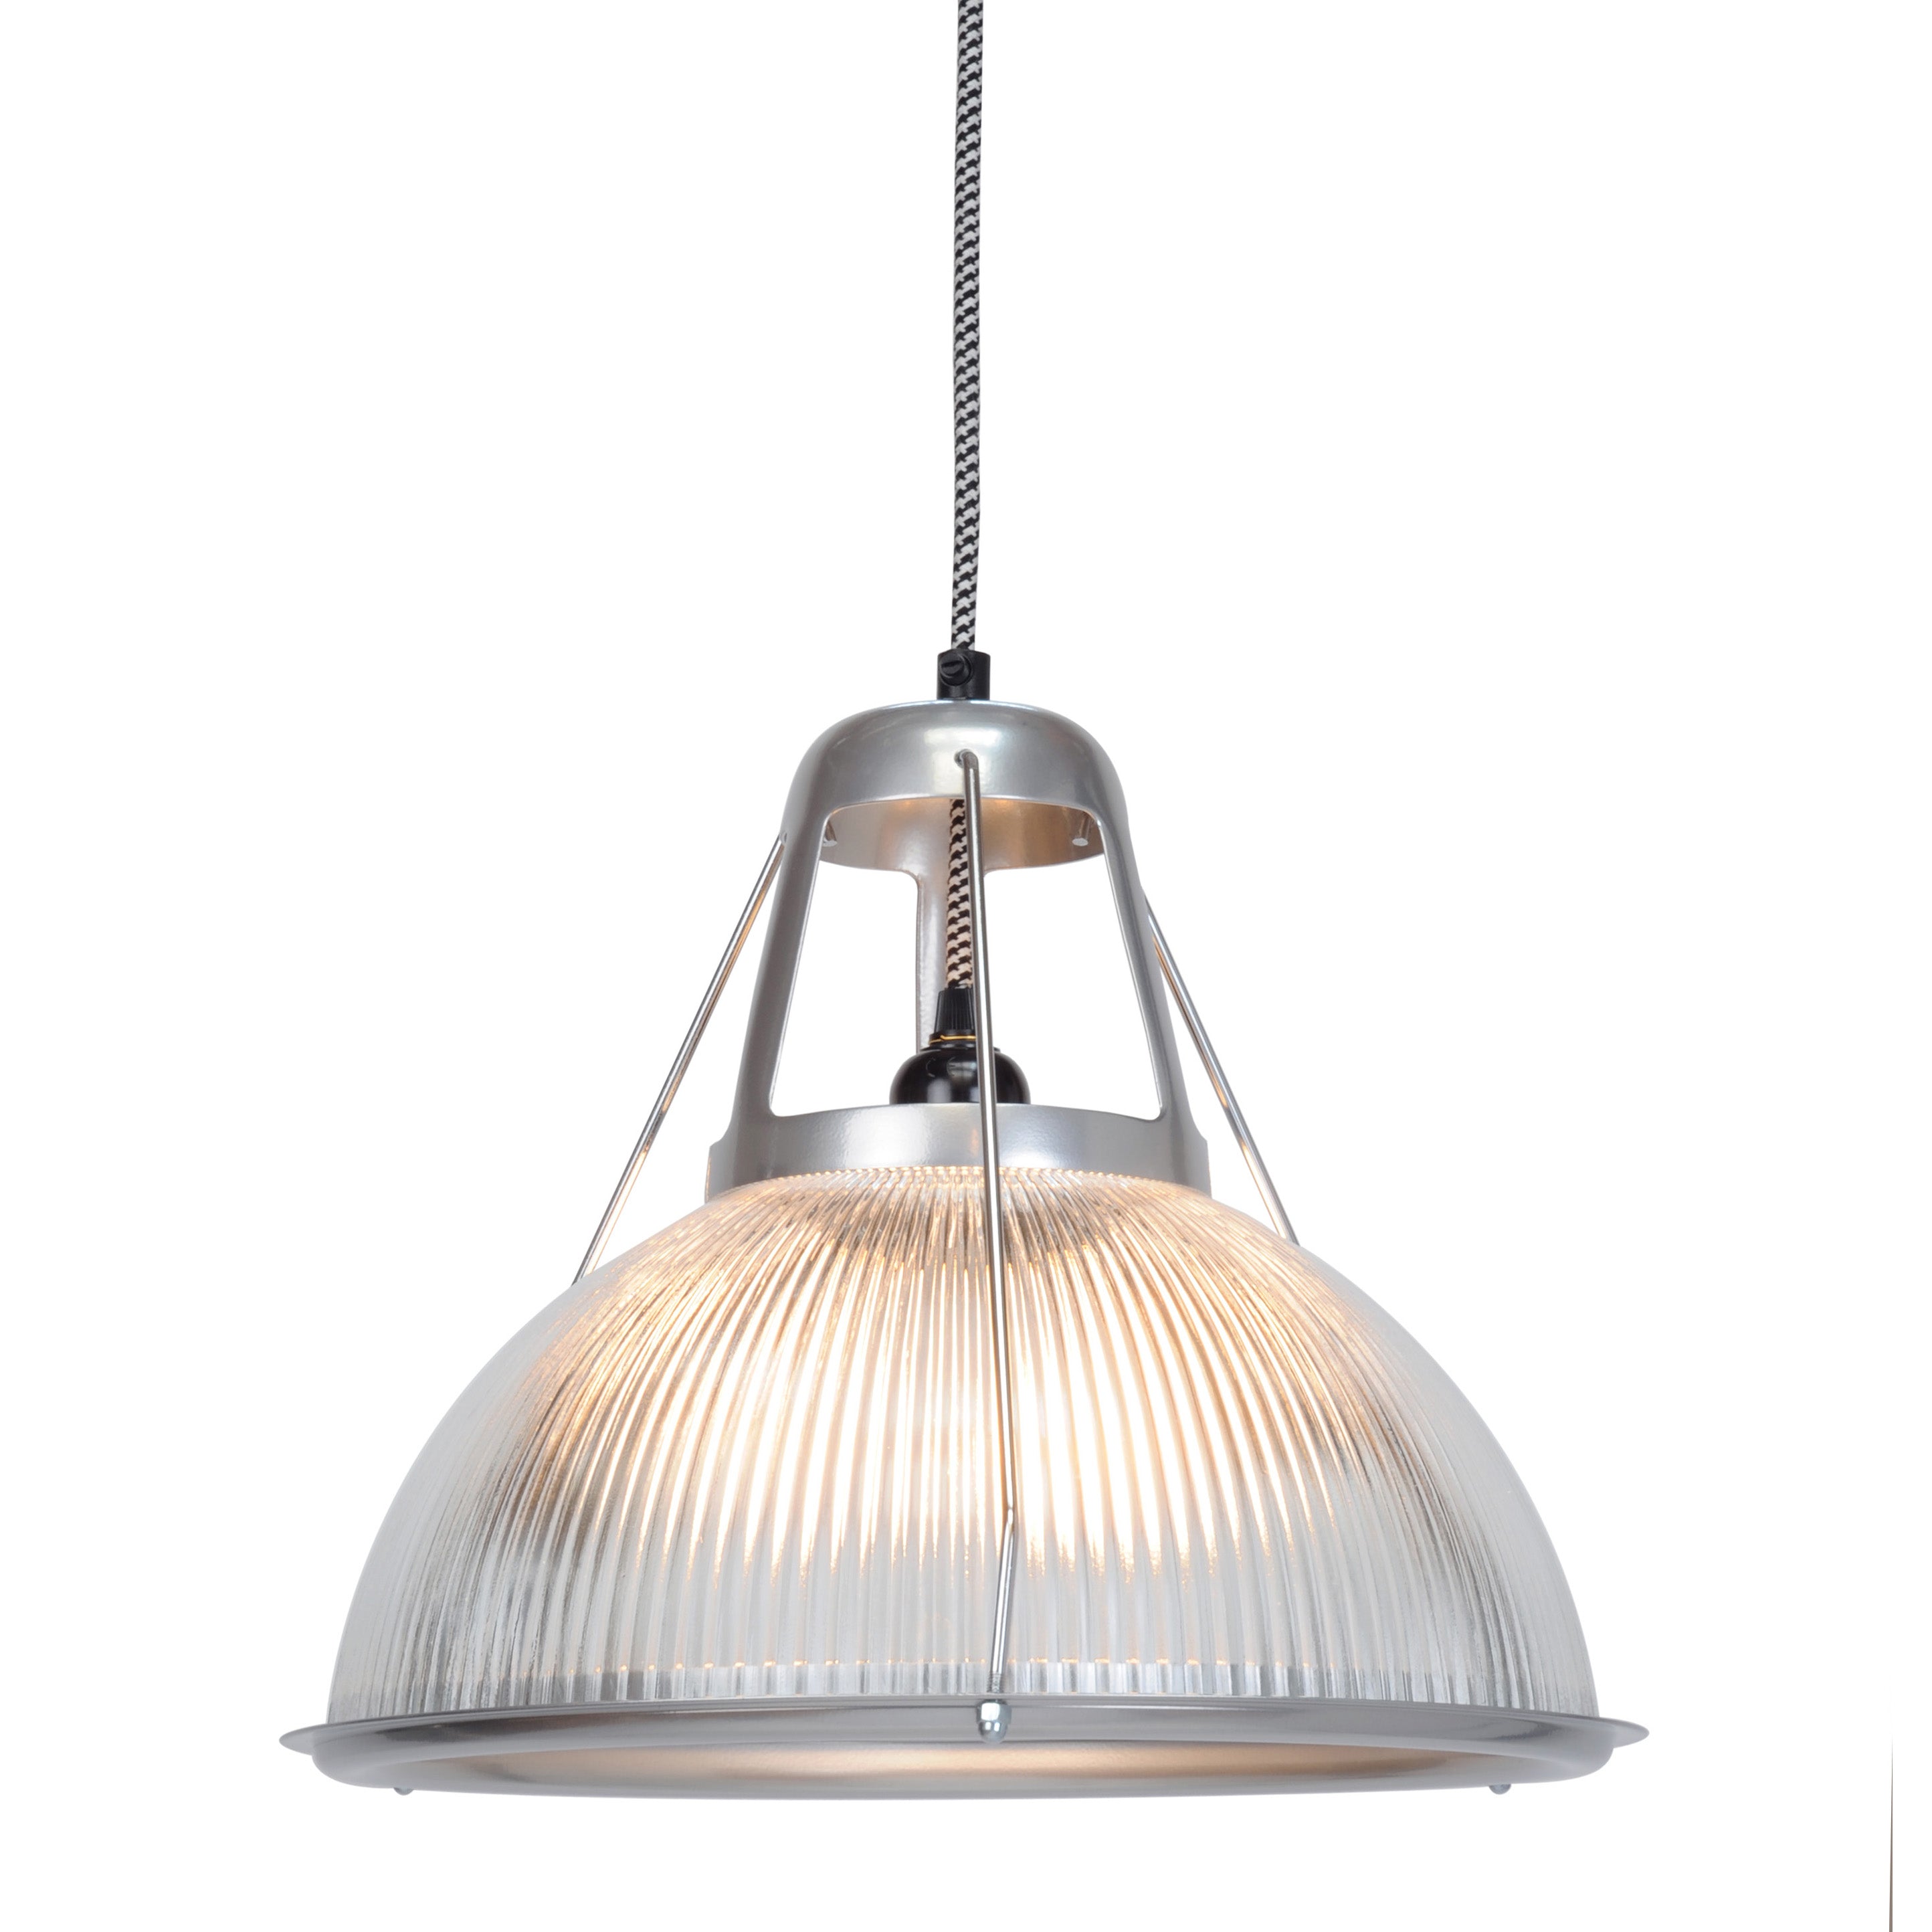 Original BTC Phane prismatic pendant lamp in moulded glass from Warehouse Home